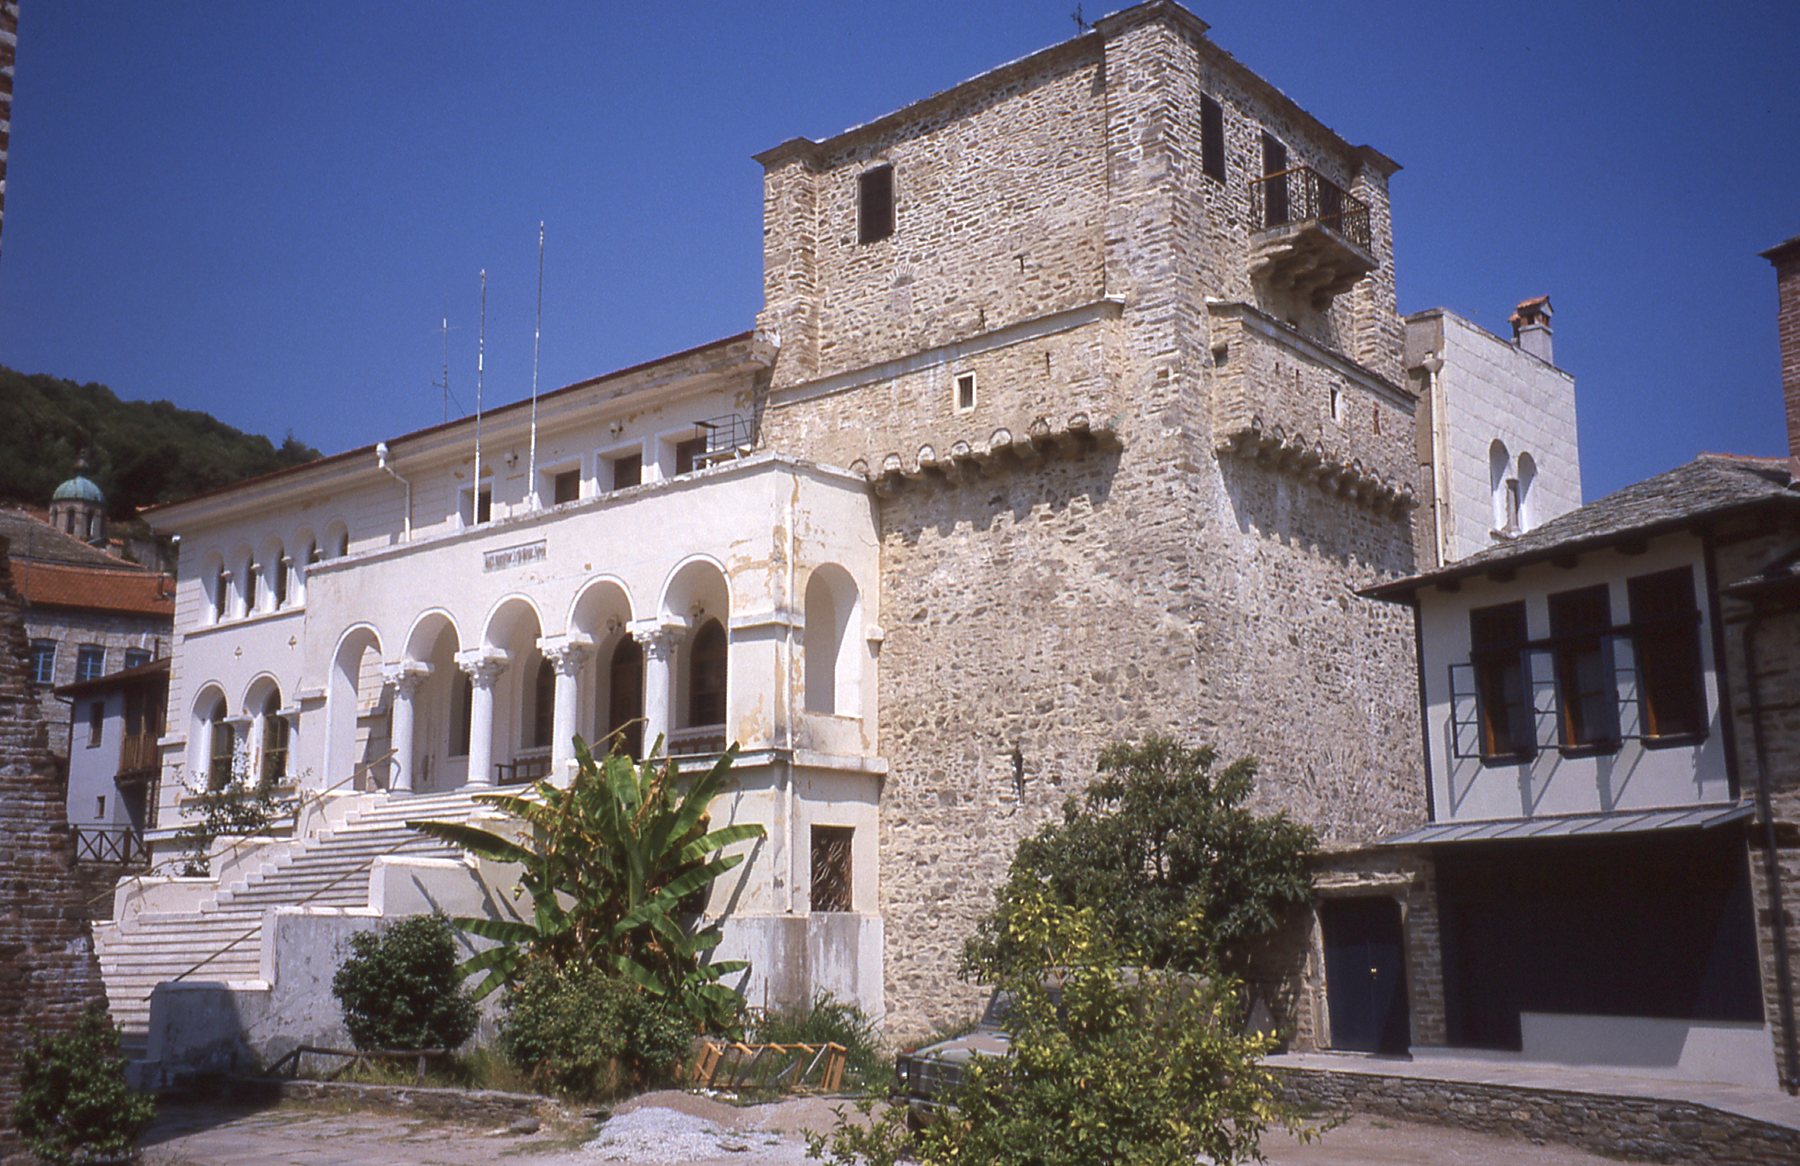 The building where the Members of the Holy Epistasia meet in Grigoriou